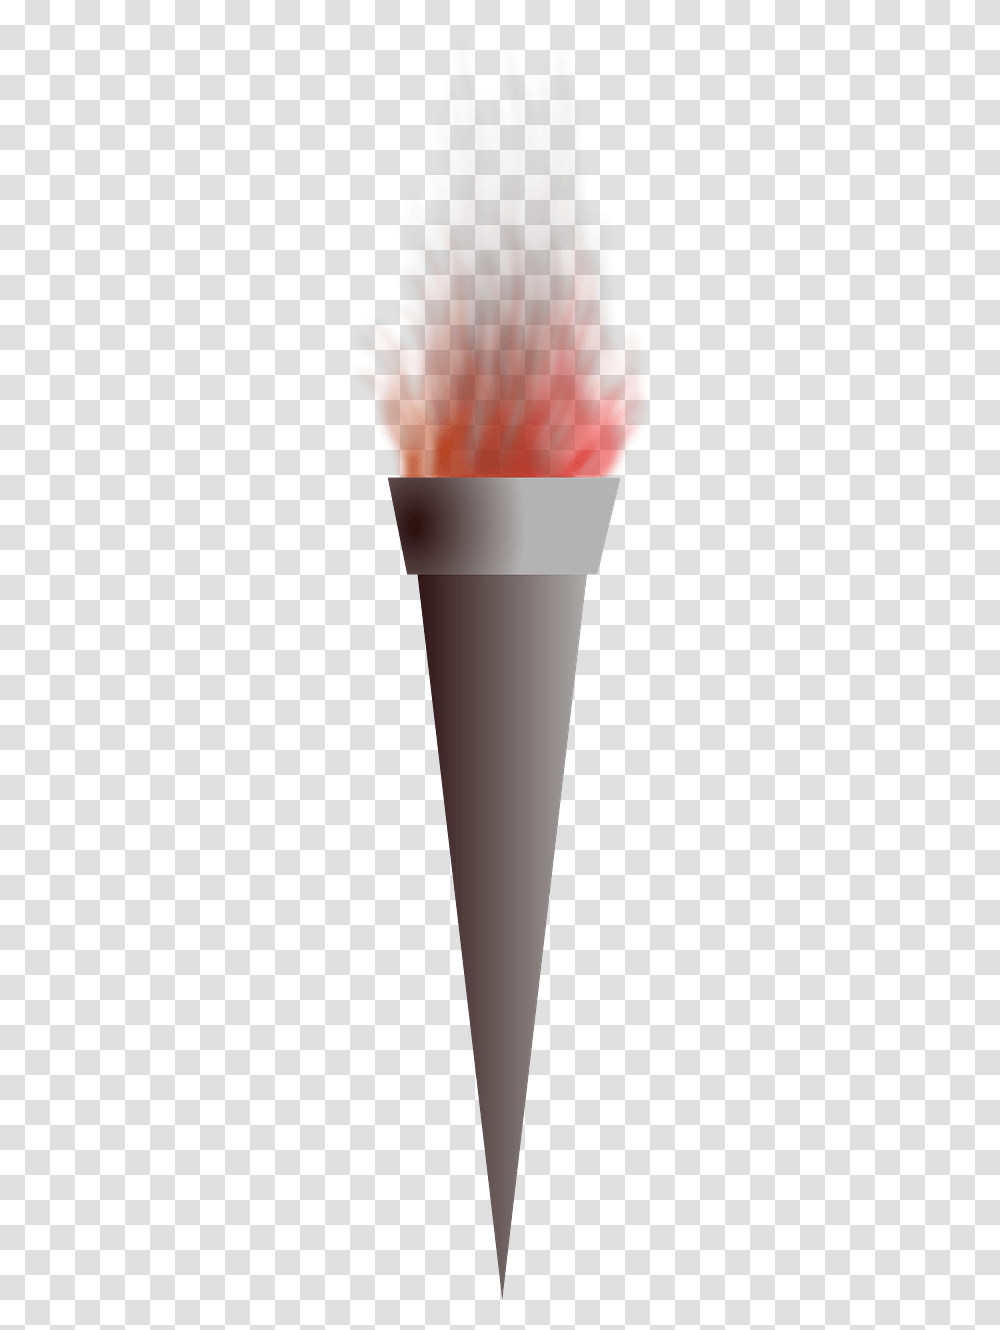 Torch Fire Flame Free Picture Toothbrush, Cone, Light, Cup, Tar Transparent Png